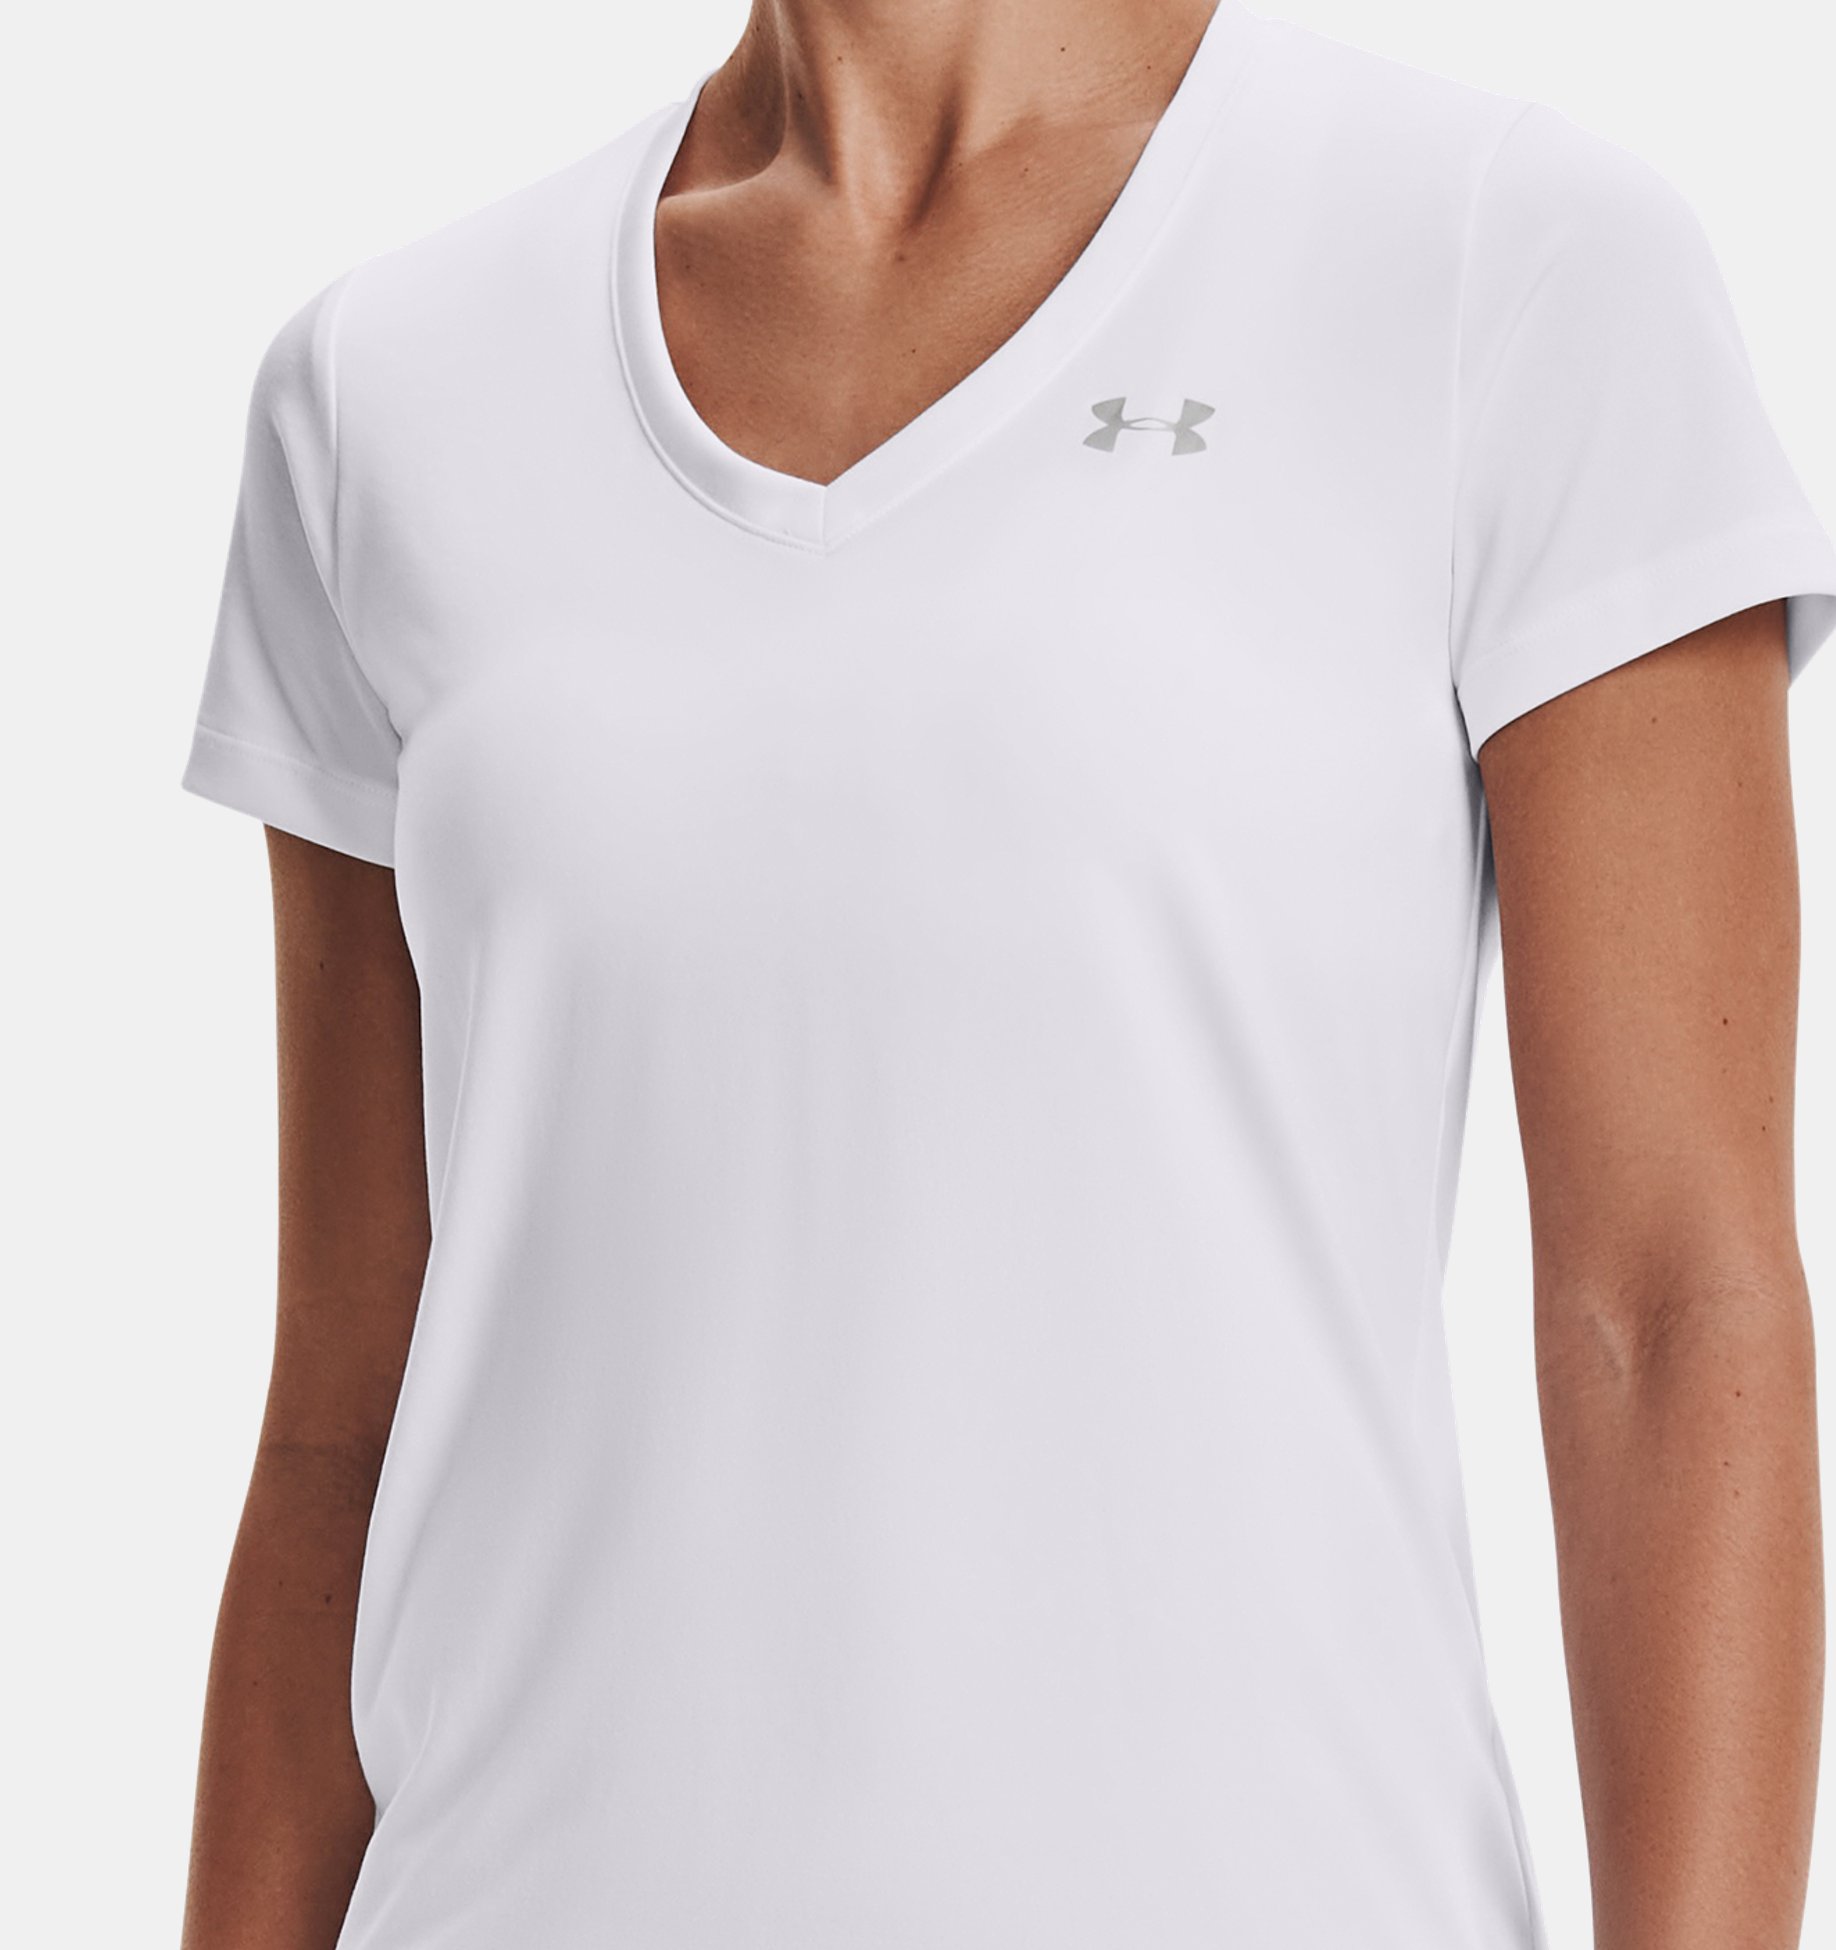 Under Armour Women's Tri-Blend Striped V-Neck Fitted T Shirt Size